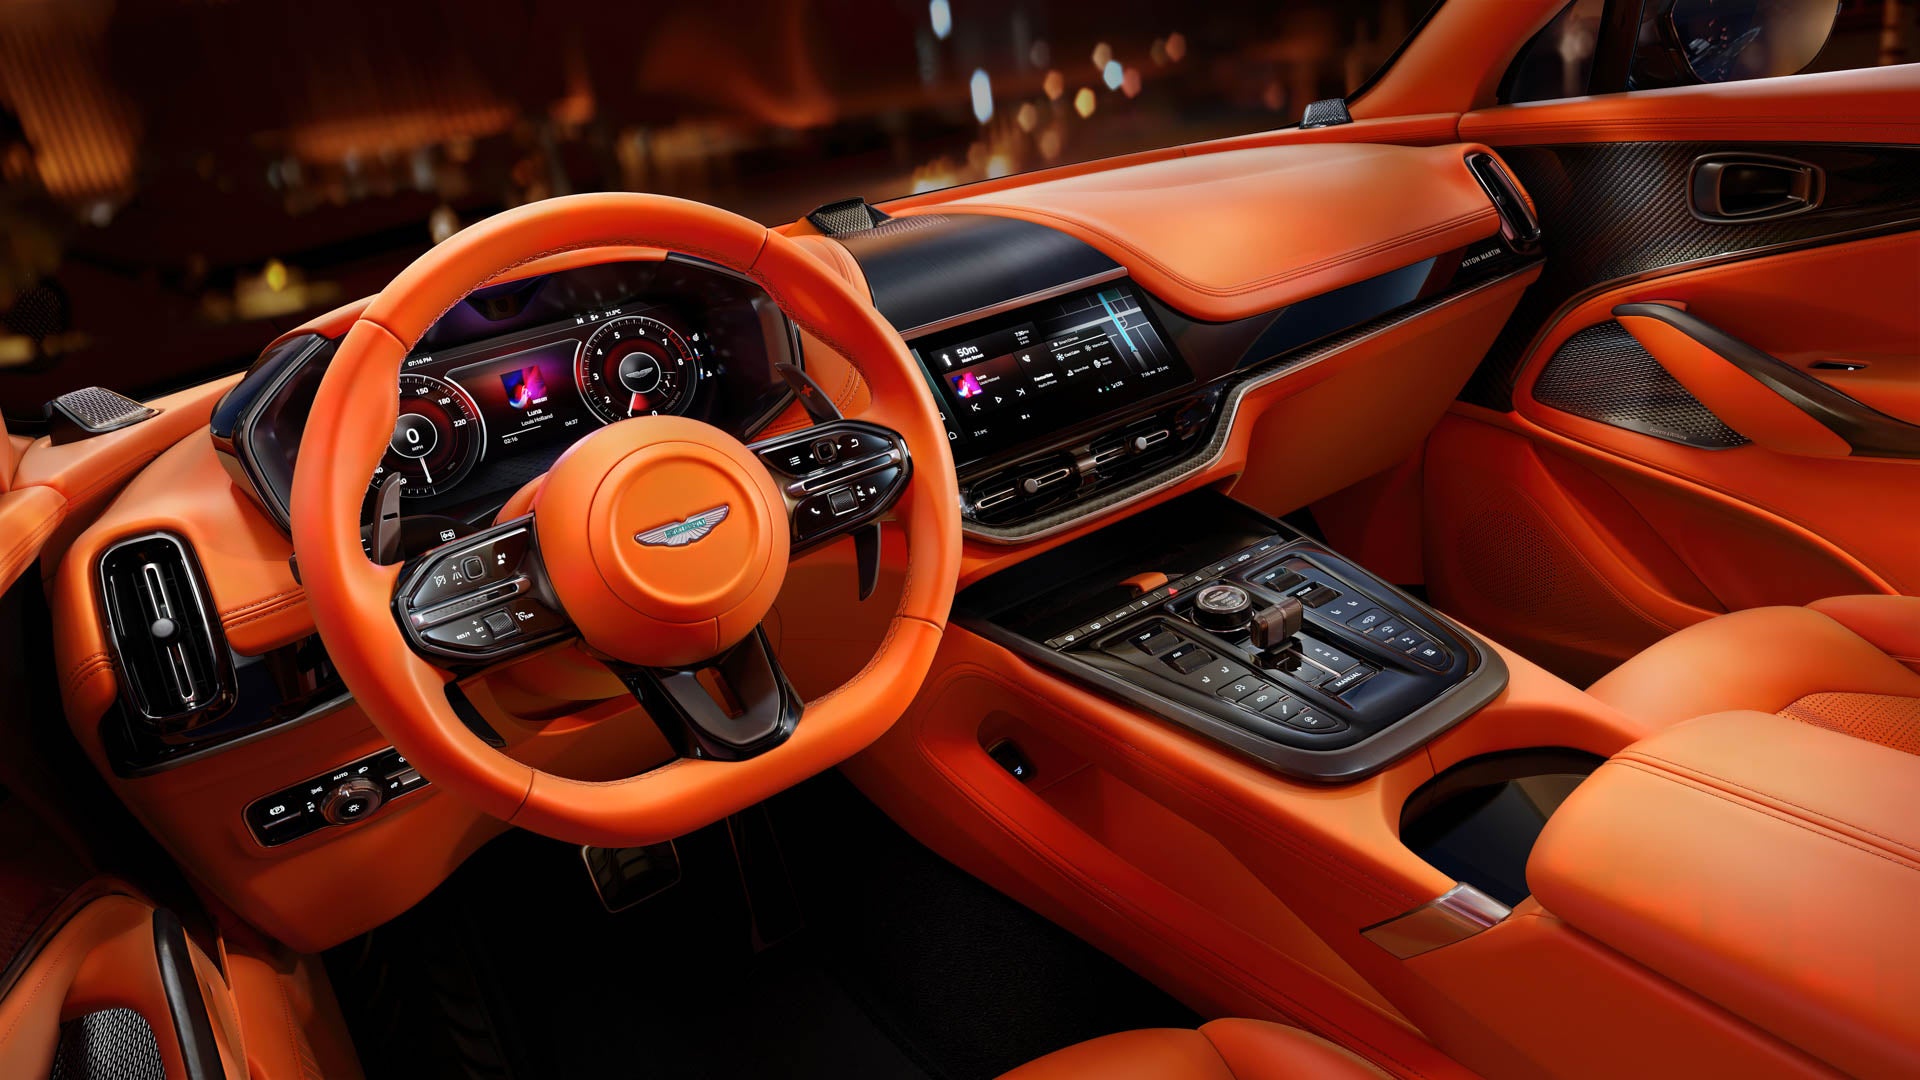 The interior of the Aston Martin DBX707 now matches its stunning exterior beauty.